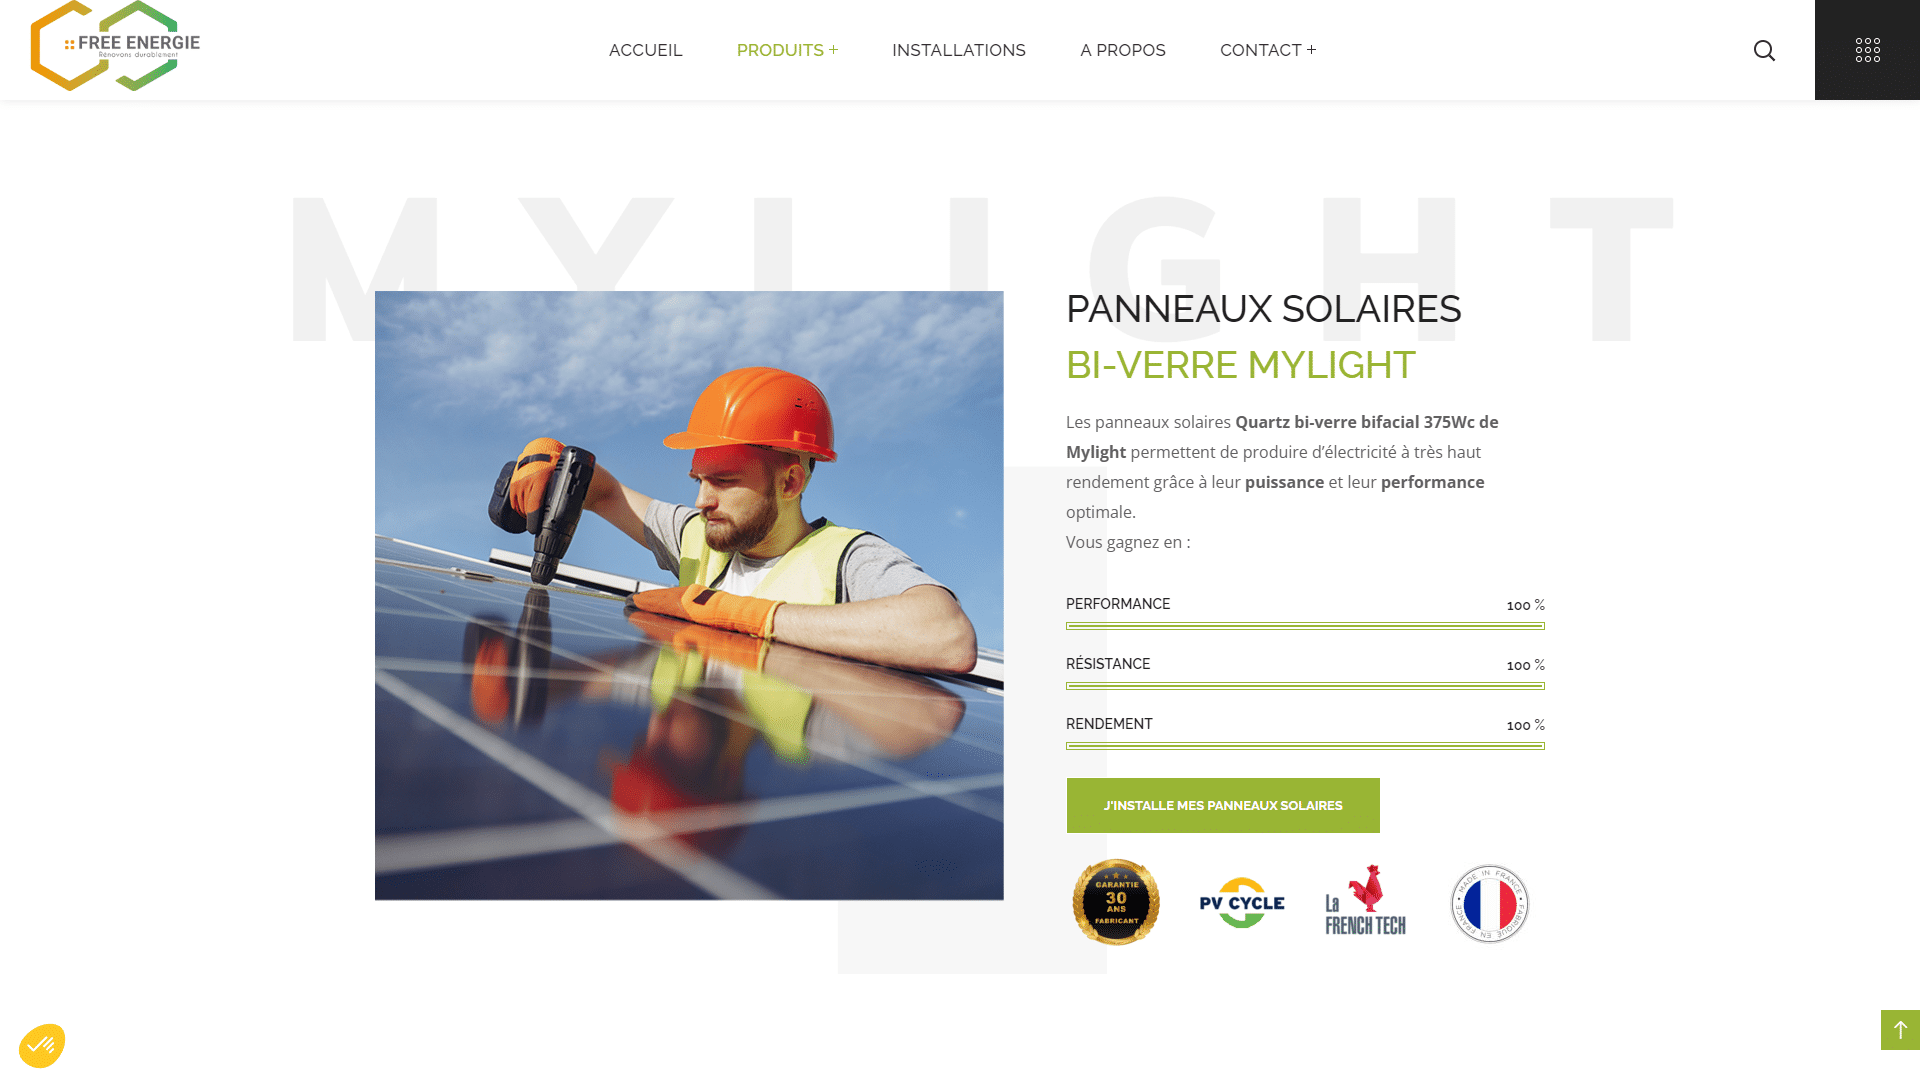 www.freeenergie.fr_panneaux-solaires_PC-1